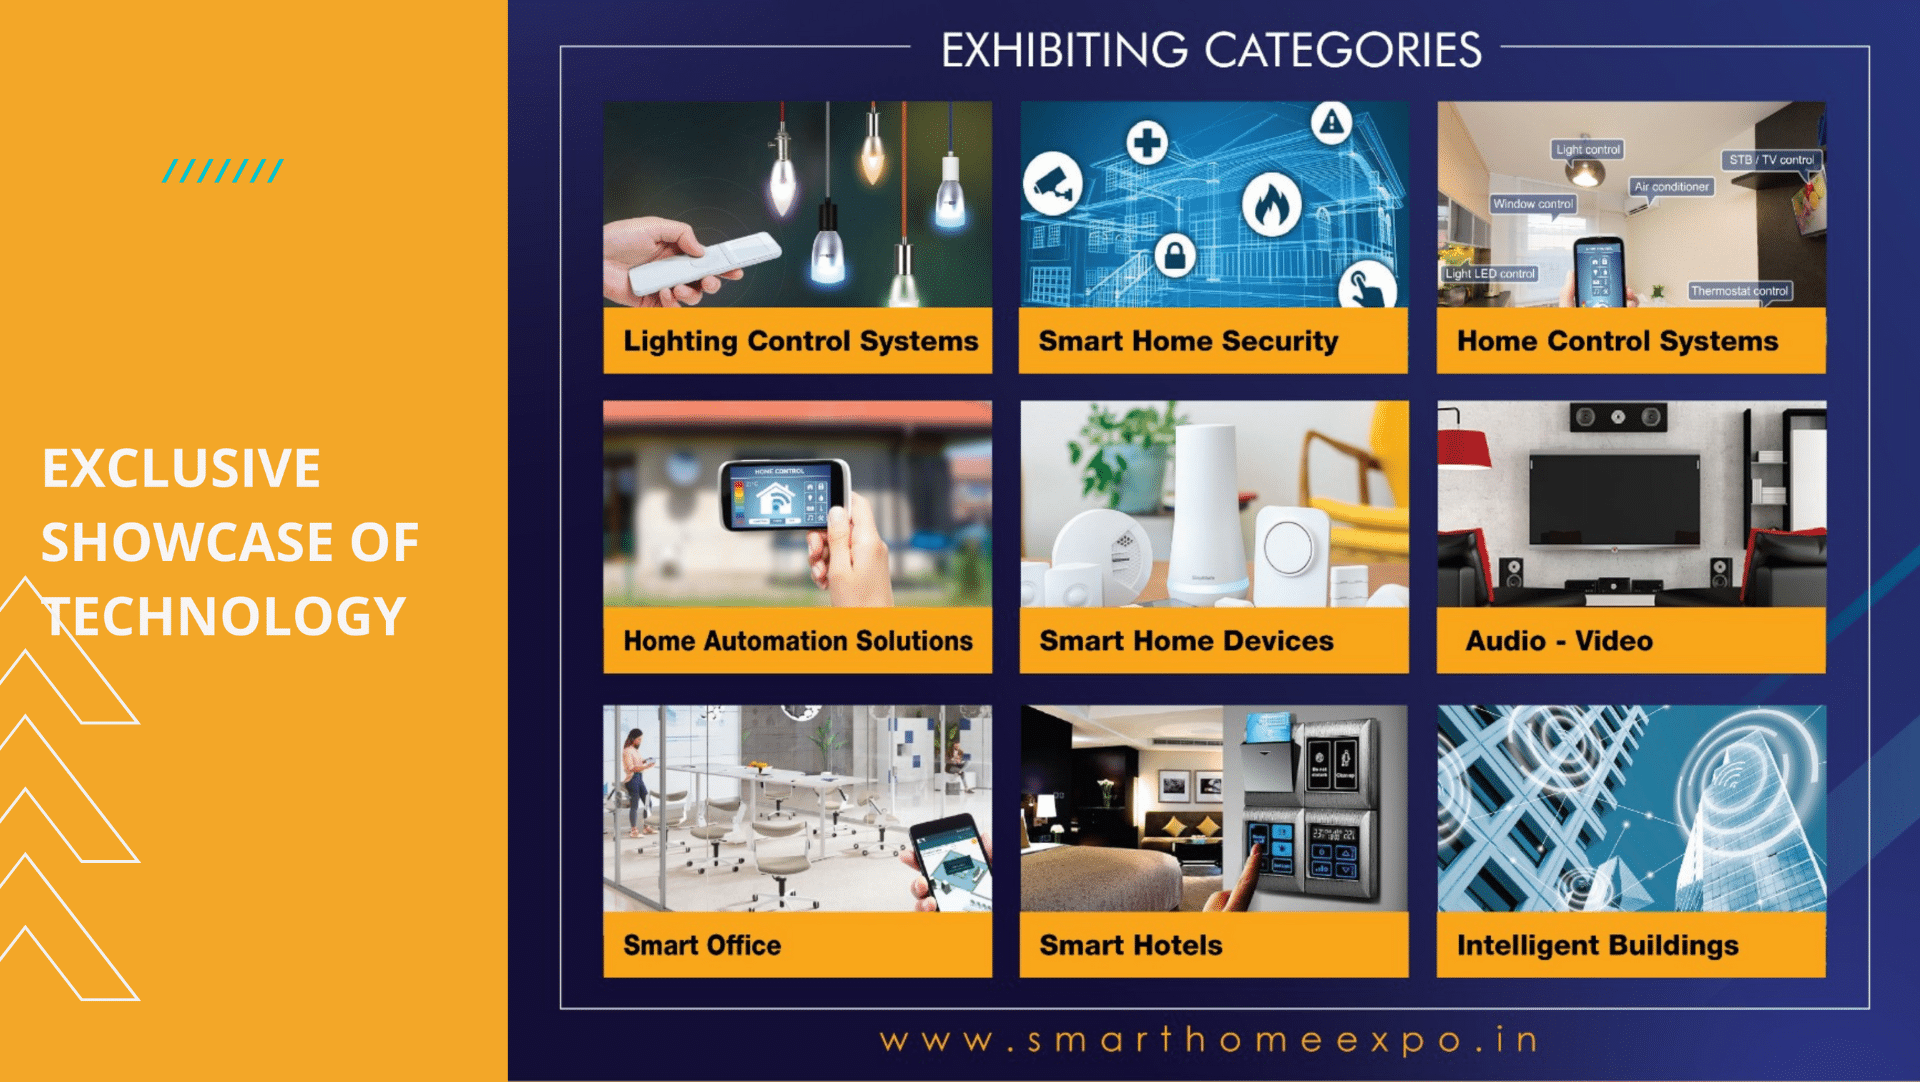 SMART HOME AUTOMATION LEADER SHELLY LAUNCHES 8 NEW PRODUCTS AT THE CONSUMER  ELECTRONICS SHOW